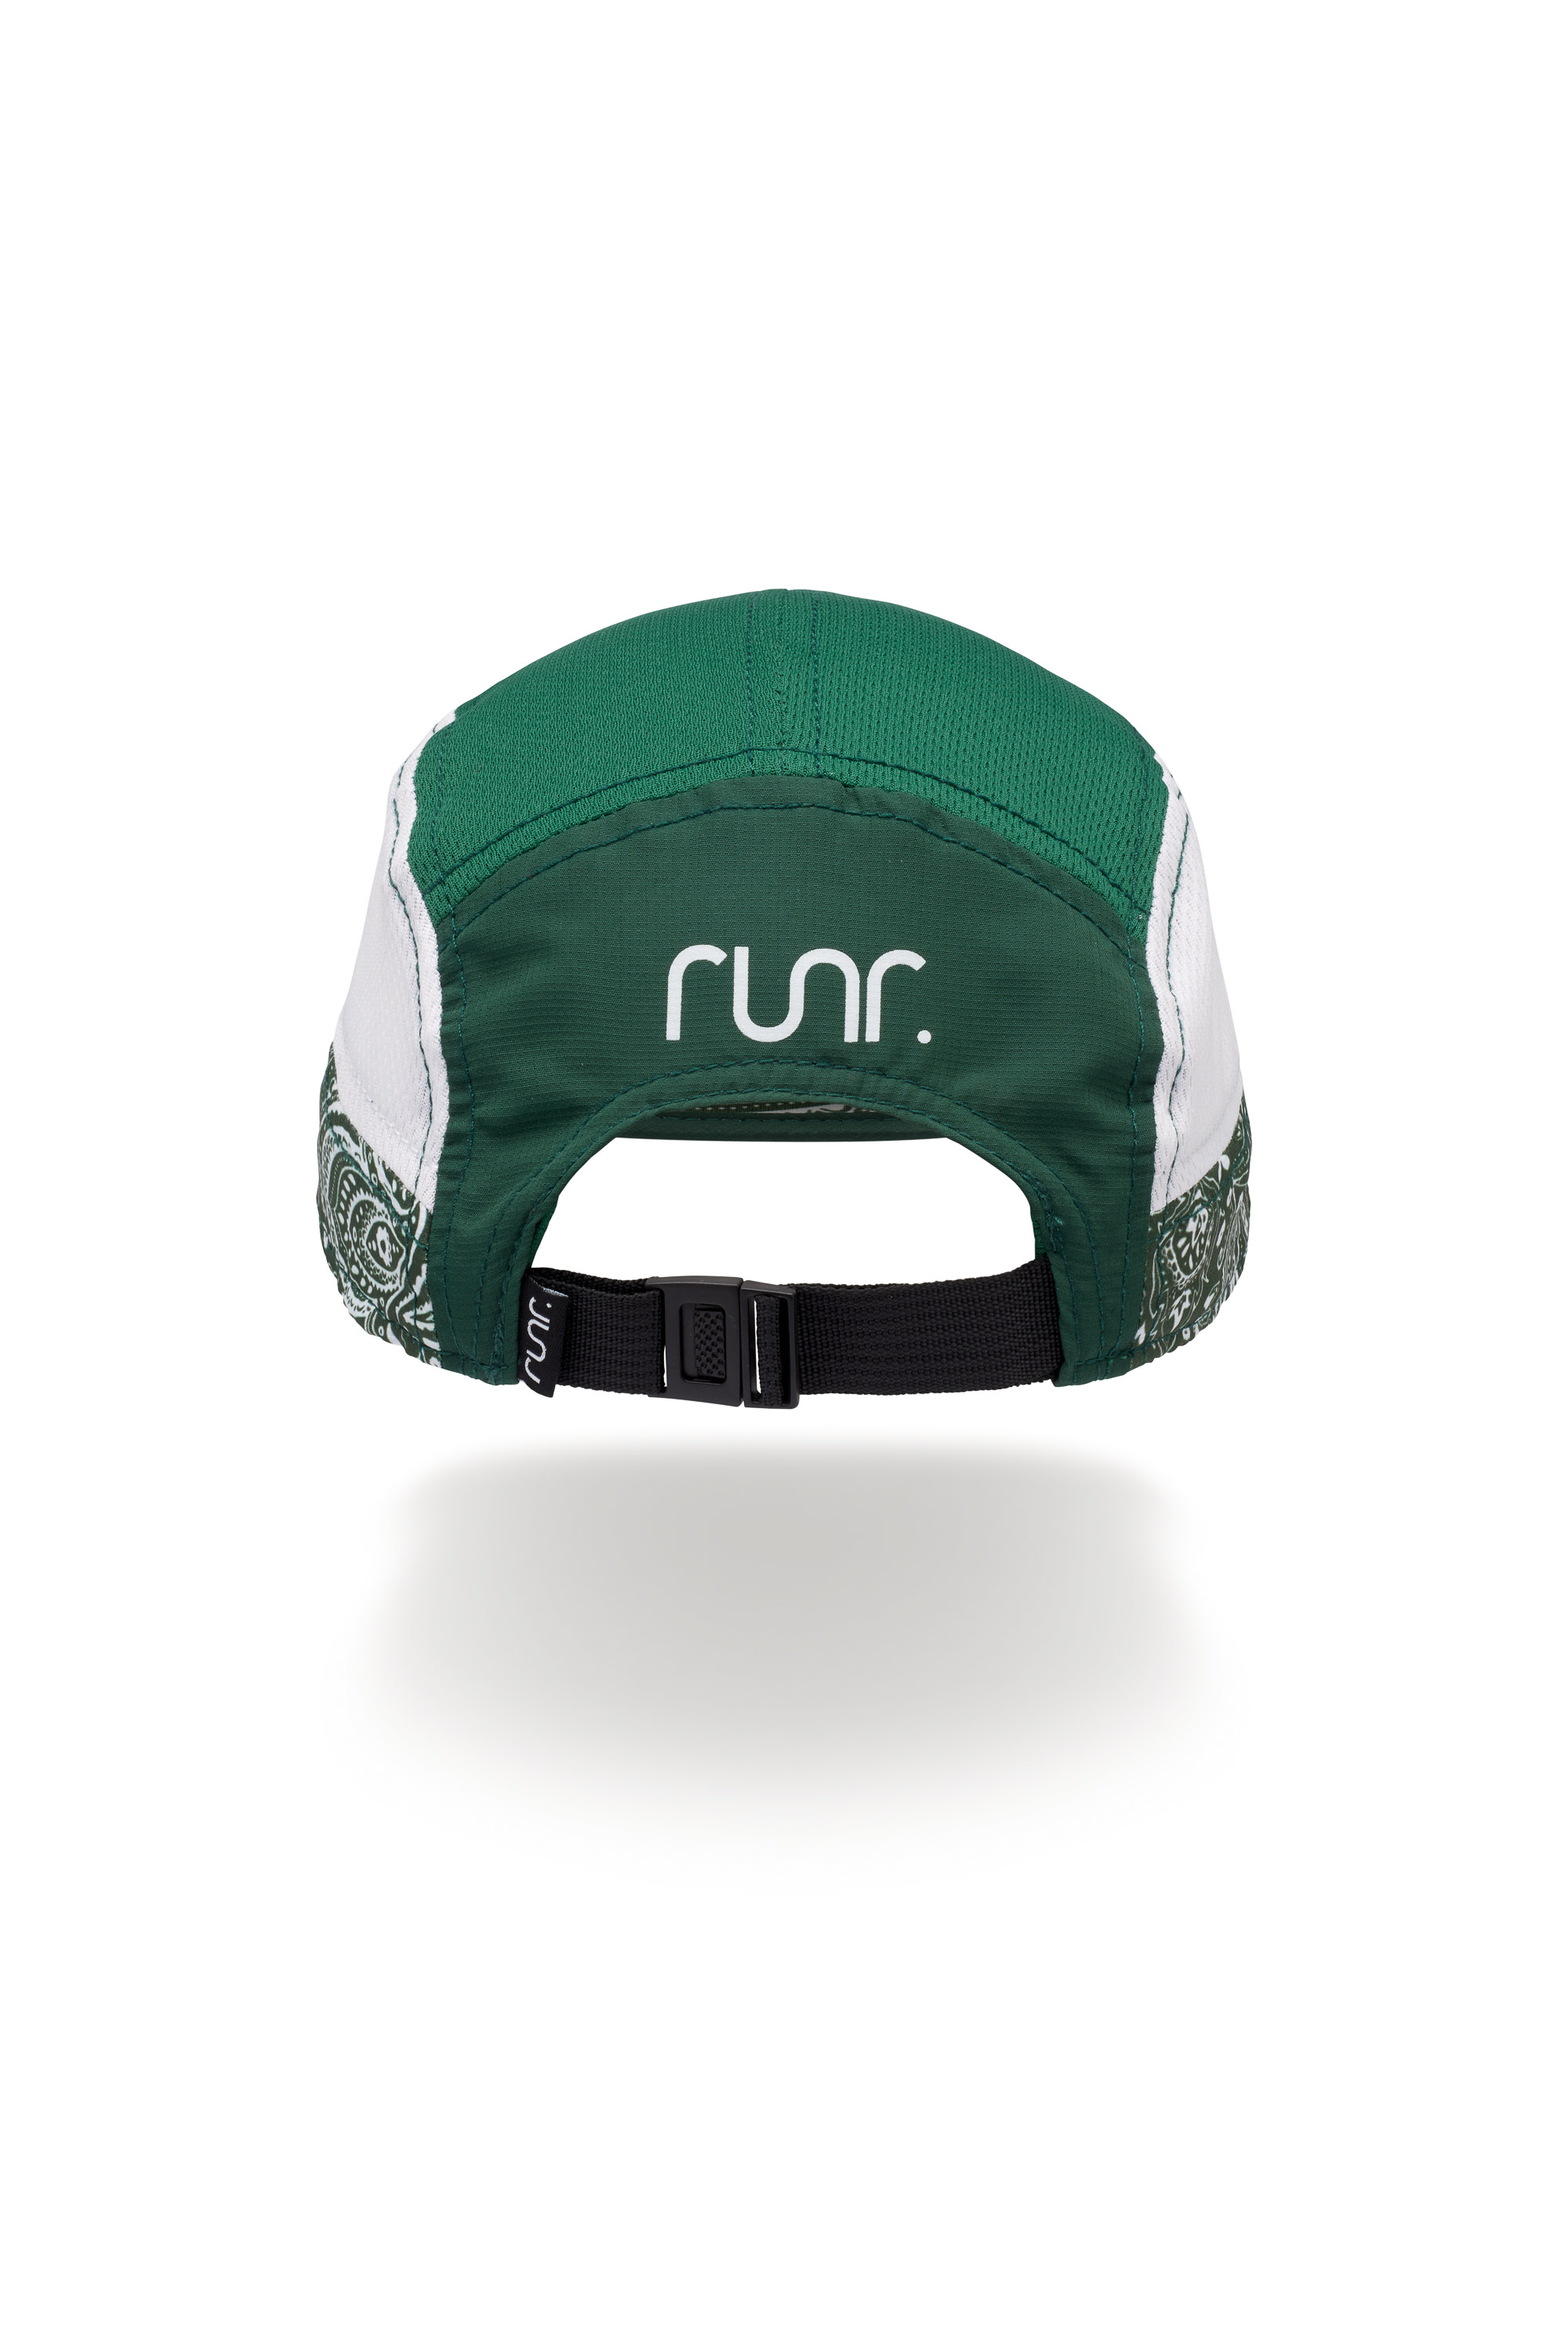 Runr 'Leave Nothing But Footprints' Technical Running Hat